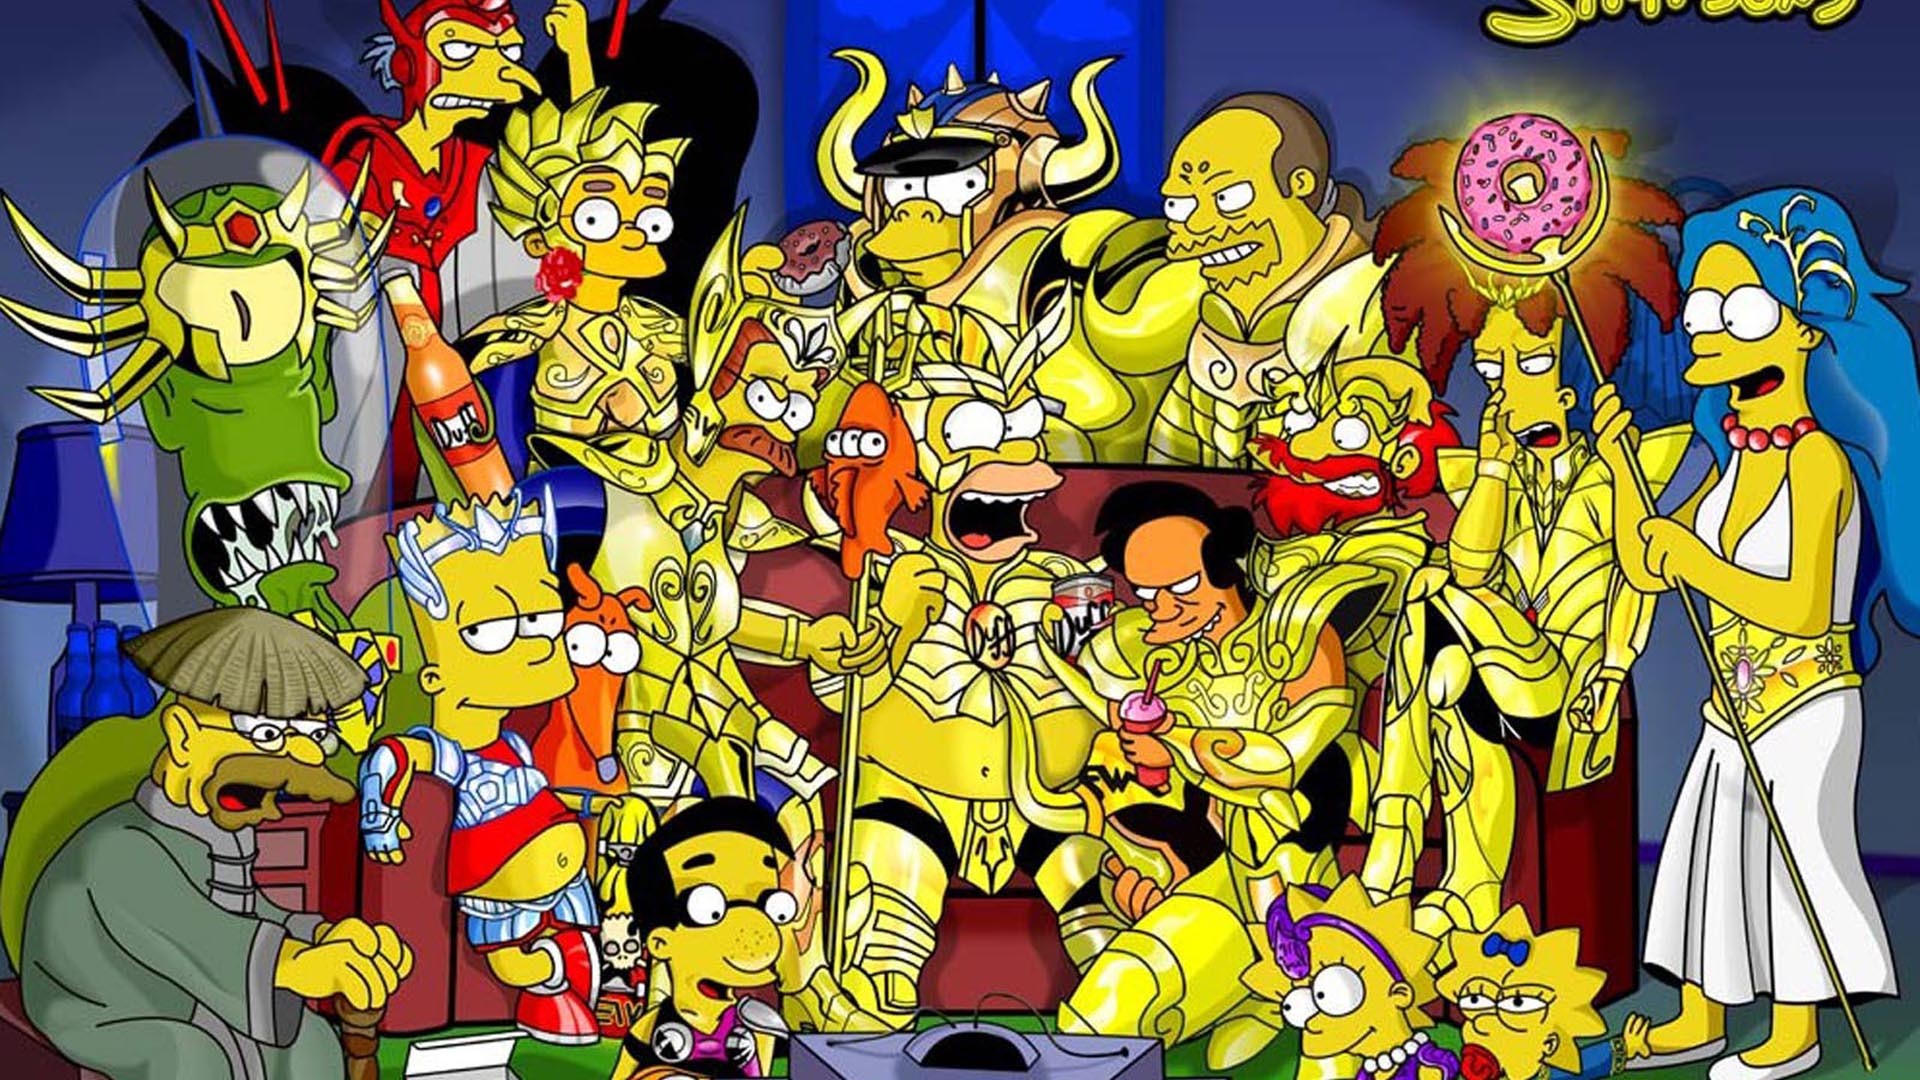 1920x1080 knights of the zodiac simpsons picture, knights of the zodiac .